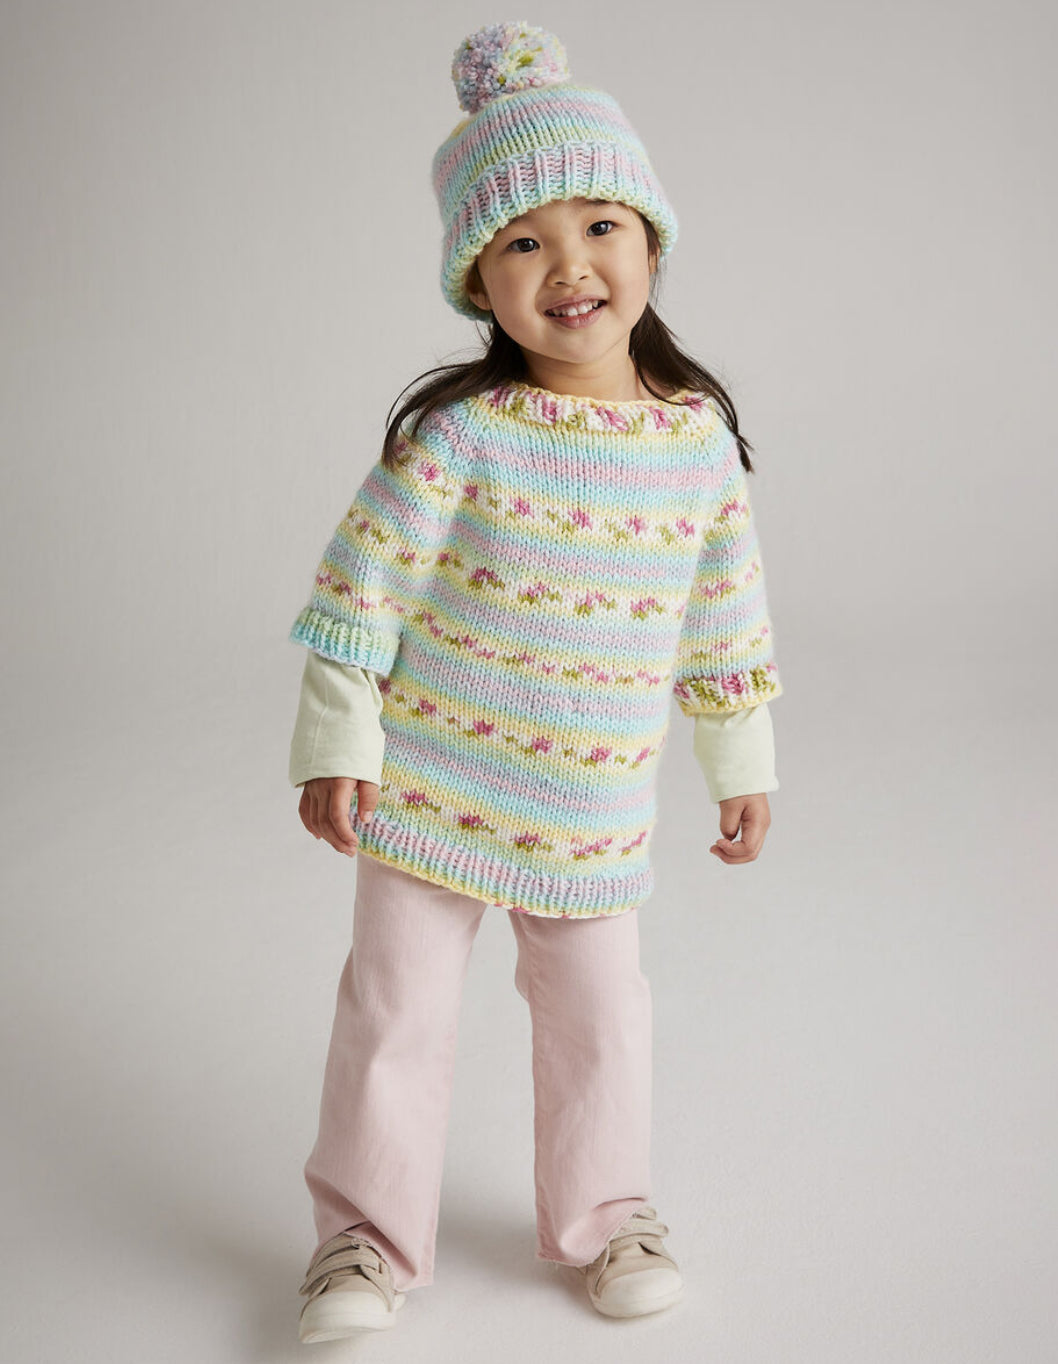 NEW BLOOMS PONCHO AND HAT IN HAYFIELD BABY BLOSSOM CHUNKY